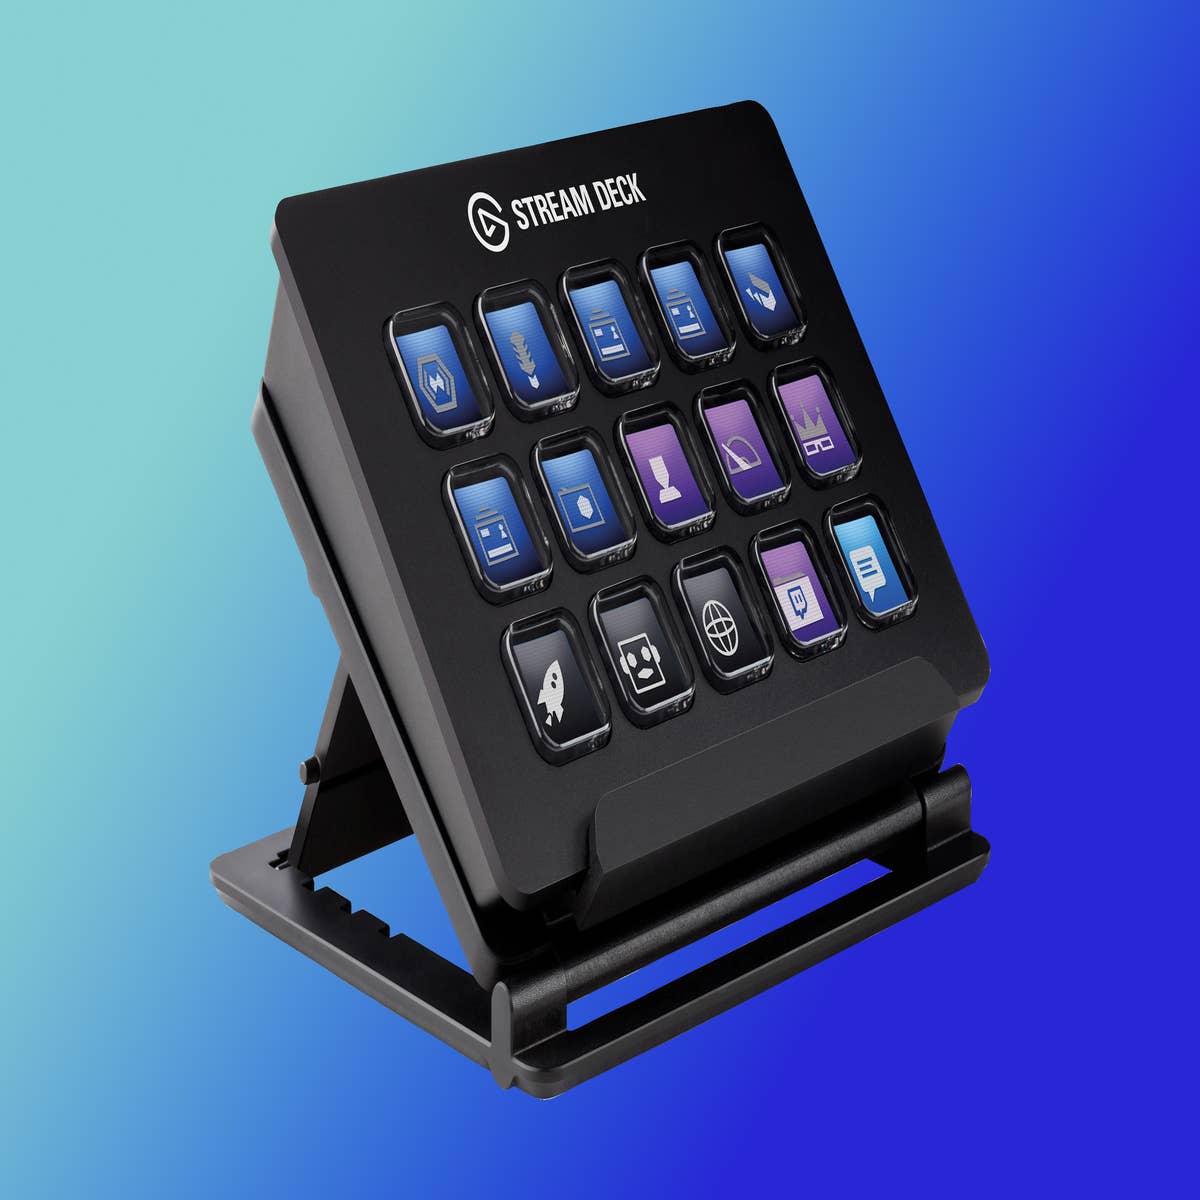 The Elgato Stream Deck Mini we just recommended is 50 percent off